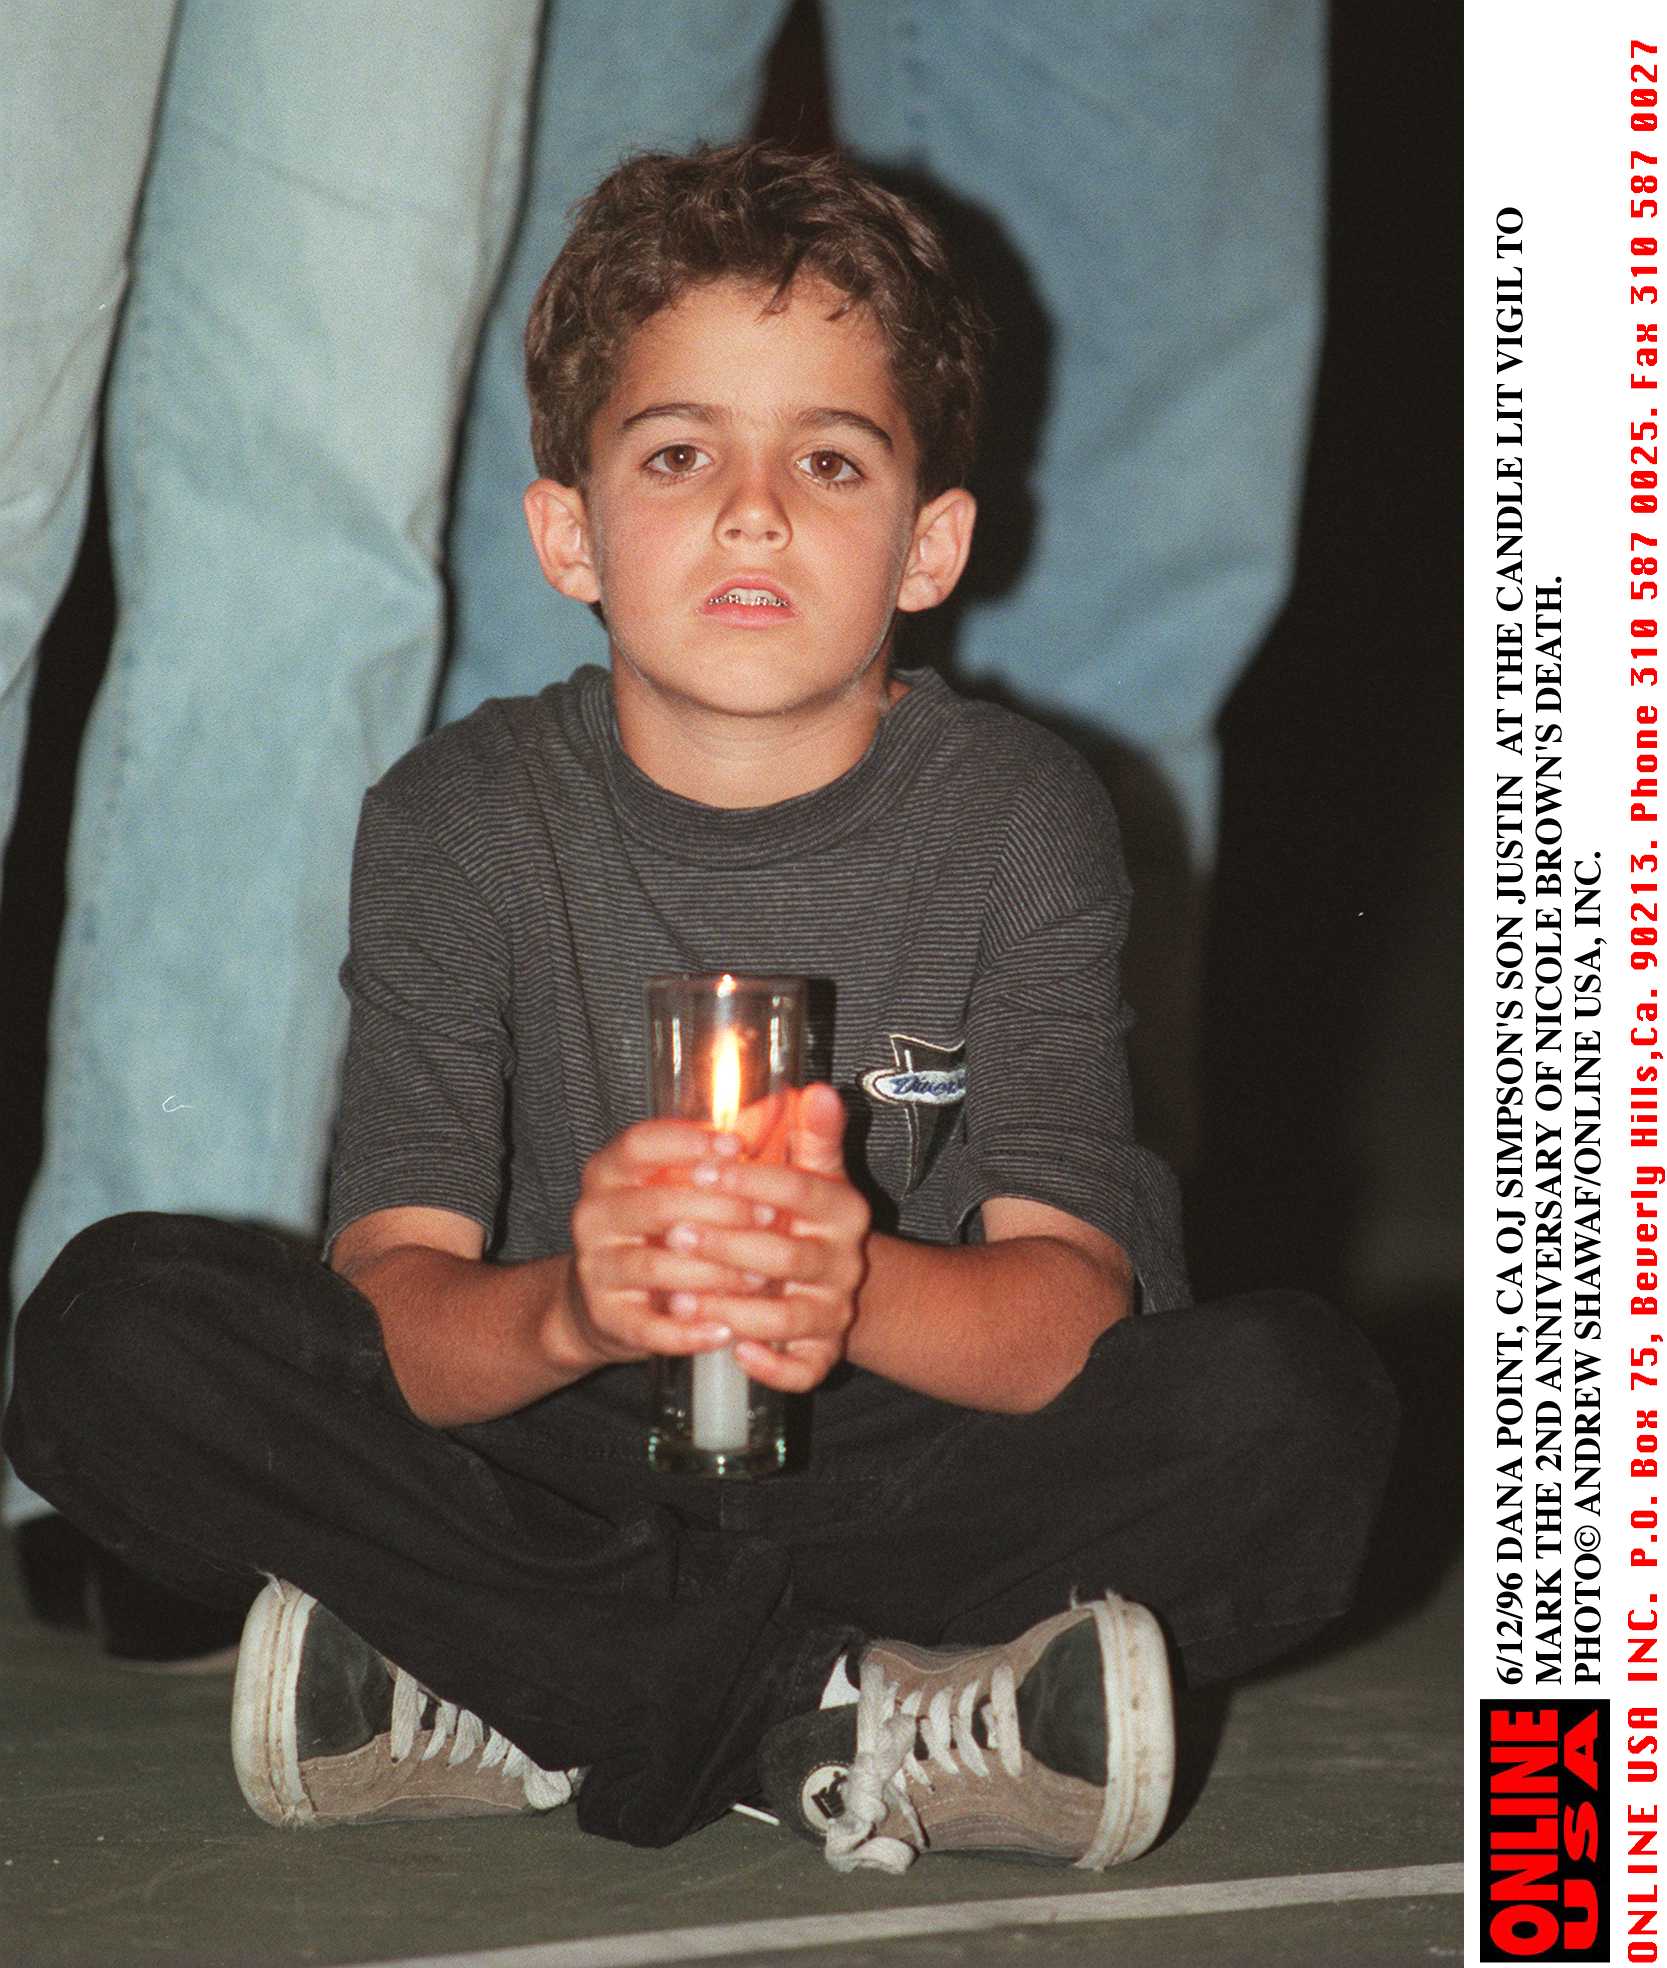 Justin Simpson at the candlelight vigil marking the second anniversary of Nicole Brown Simpson’s death on December 6, 1996 | Source: Getty Images